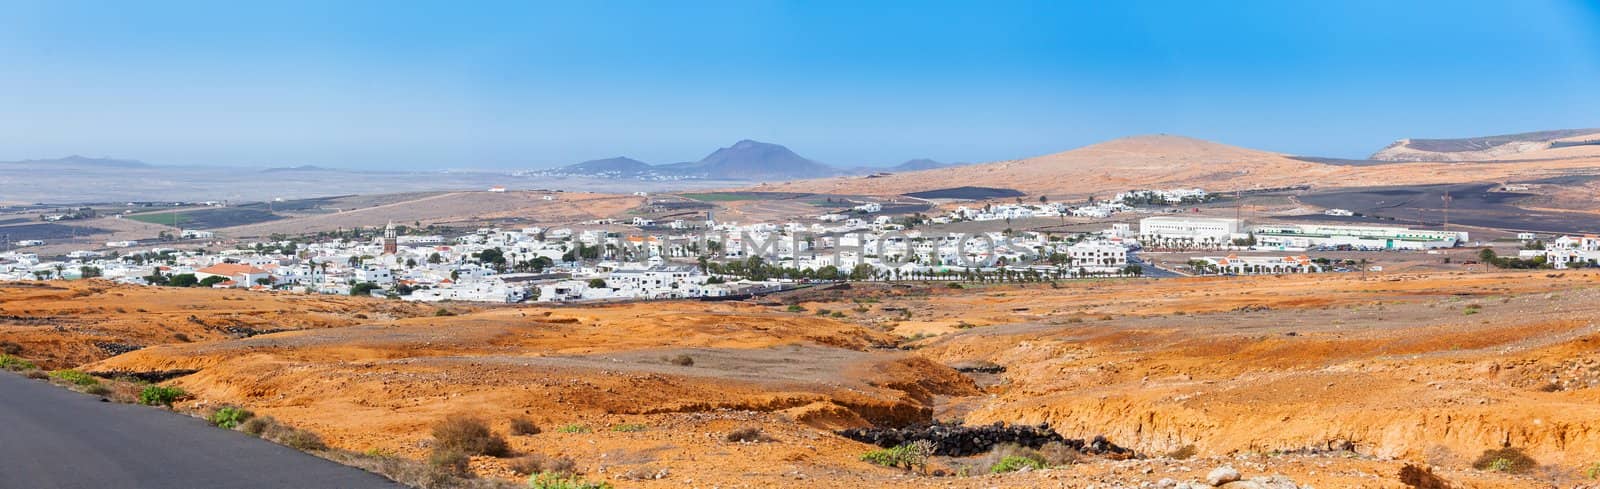 Typical houses on the island of Lanzarote by maxoliki